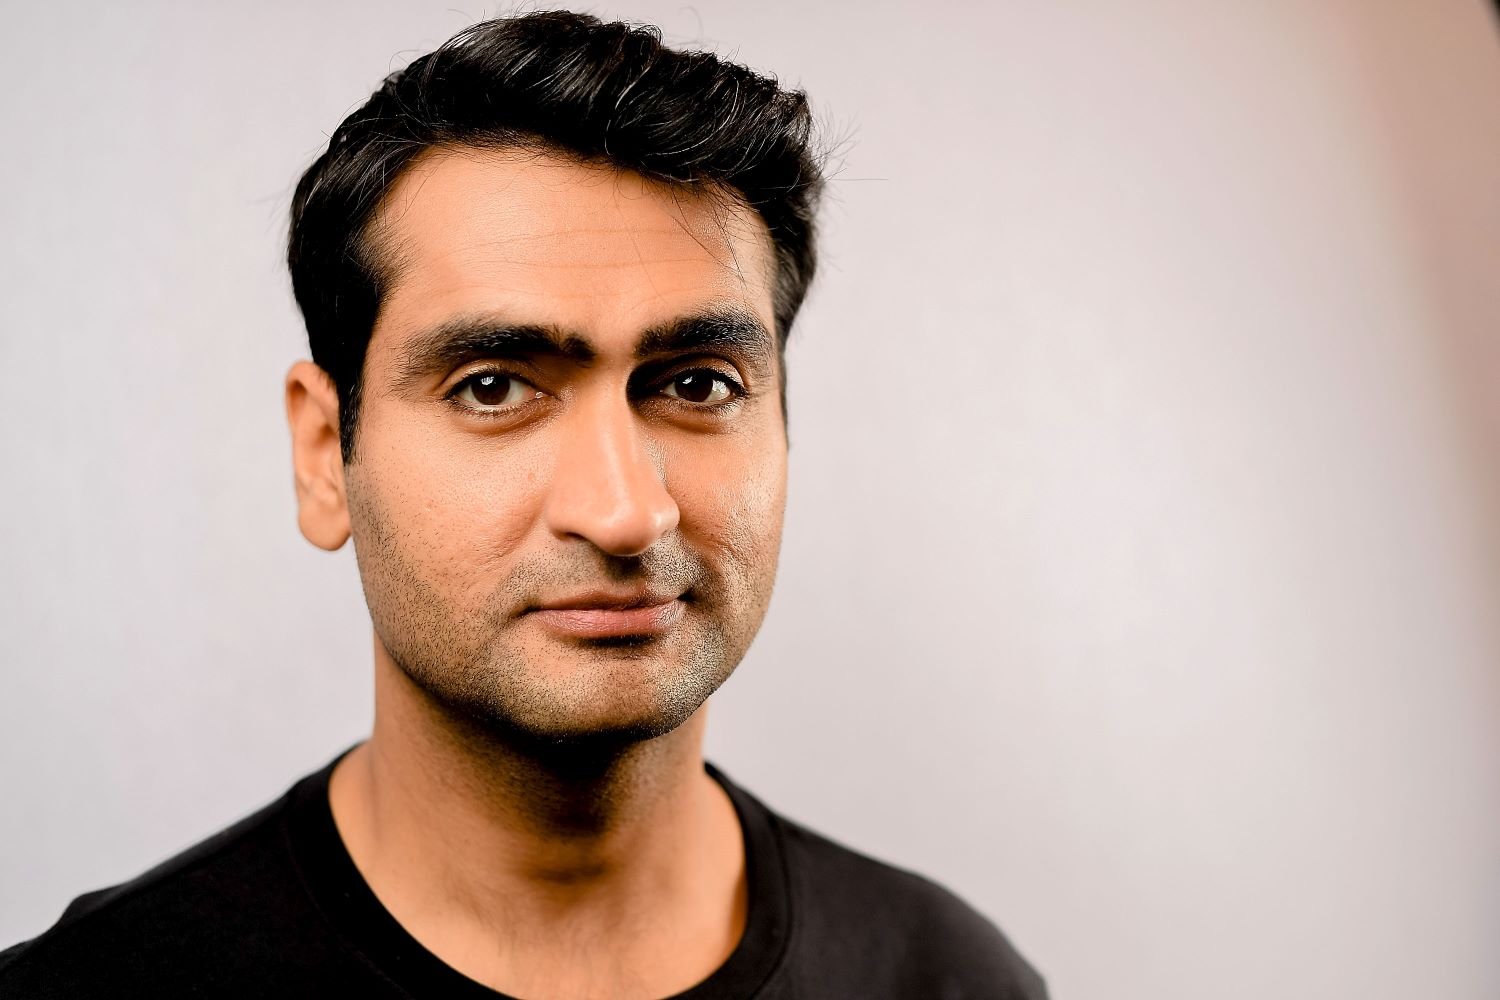 ‘The Eternals’ Kumail Nanjiani Talks About the Pressures of Being the First Pakistani Superhero in the MCU